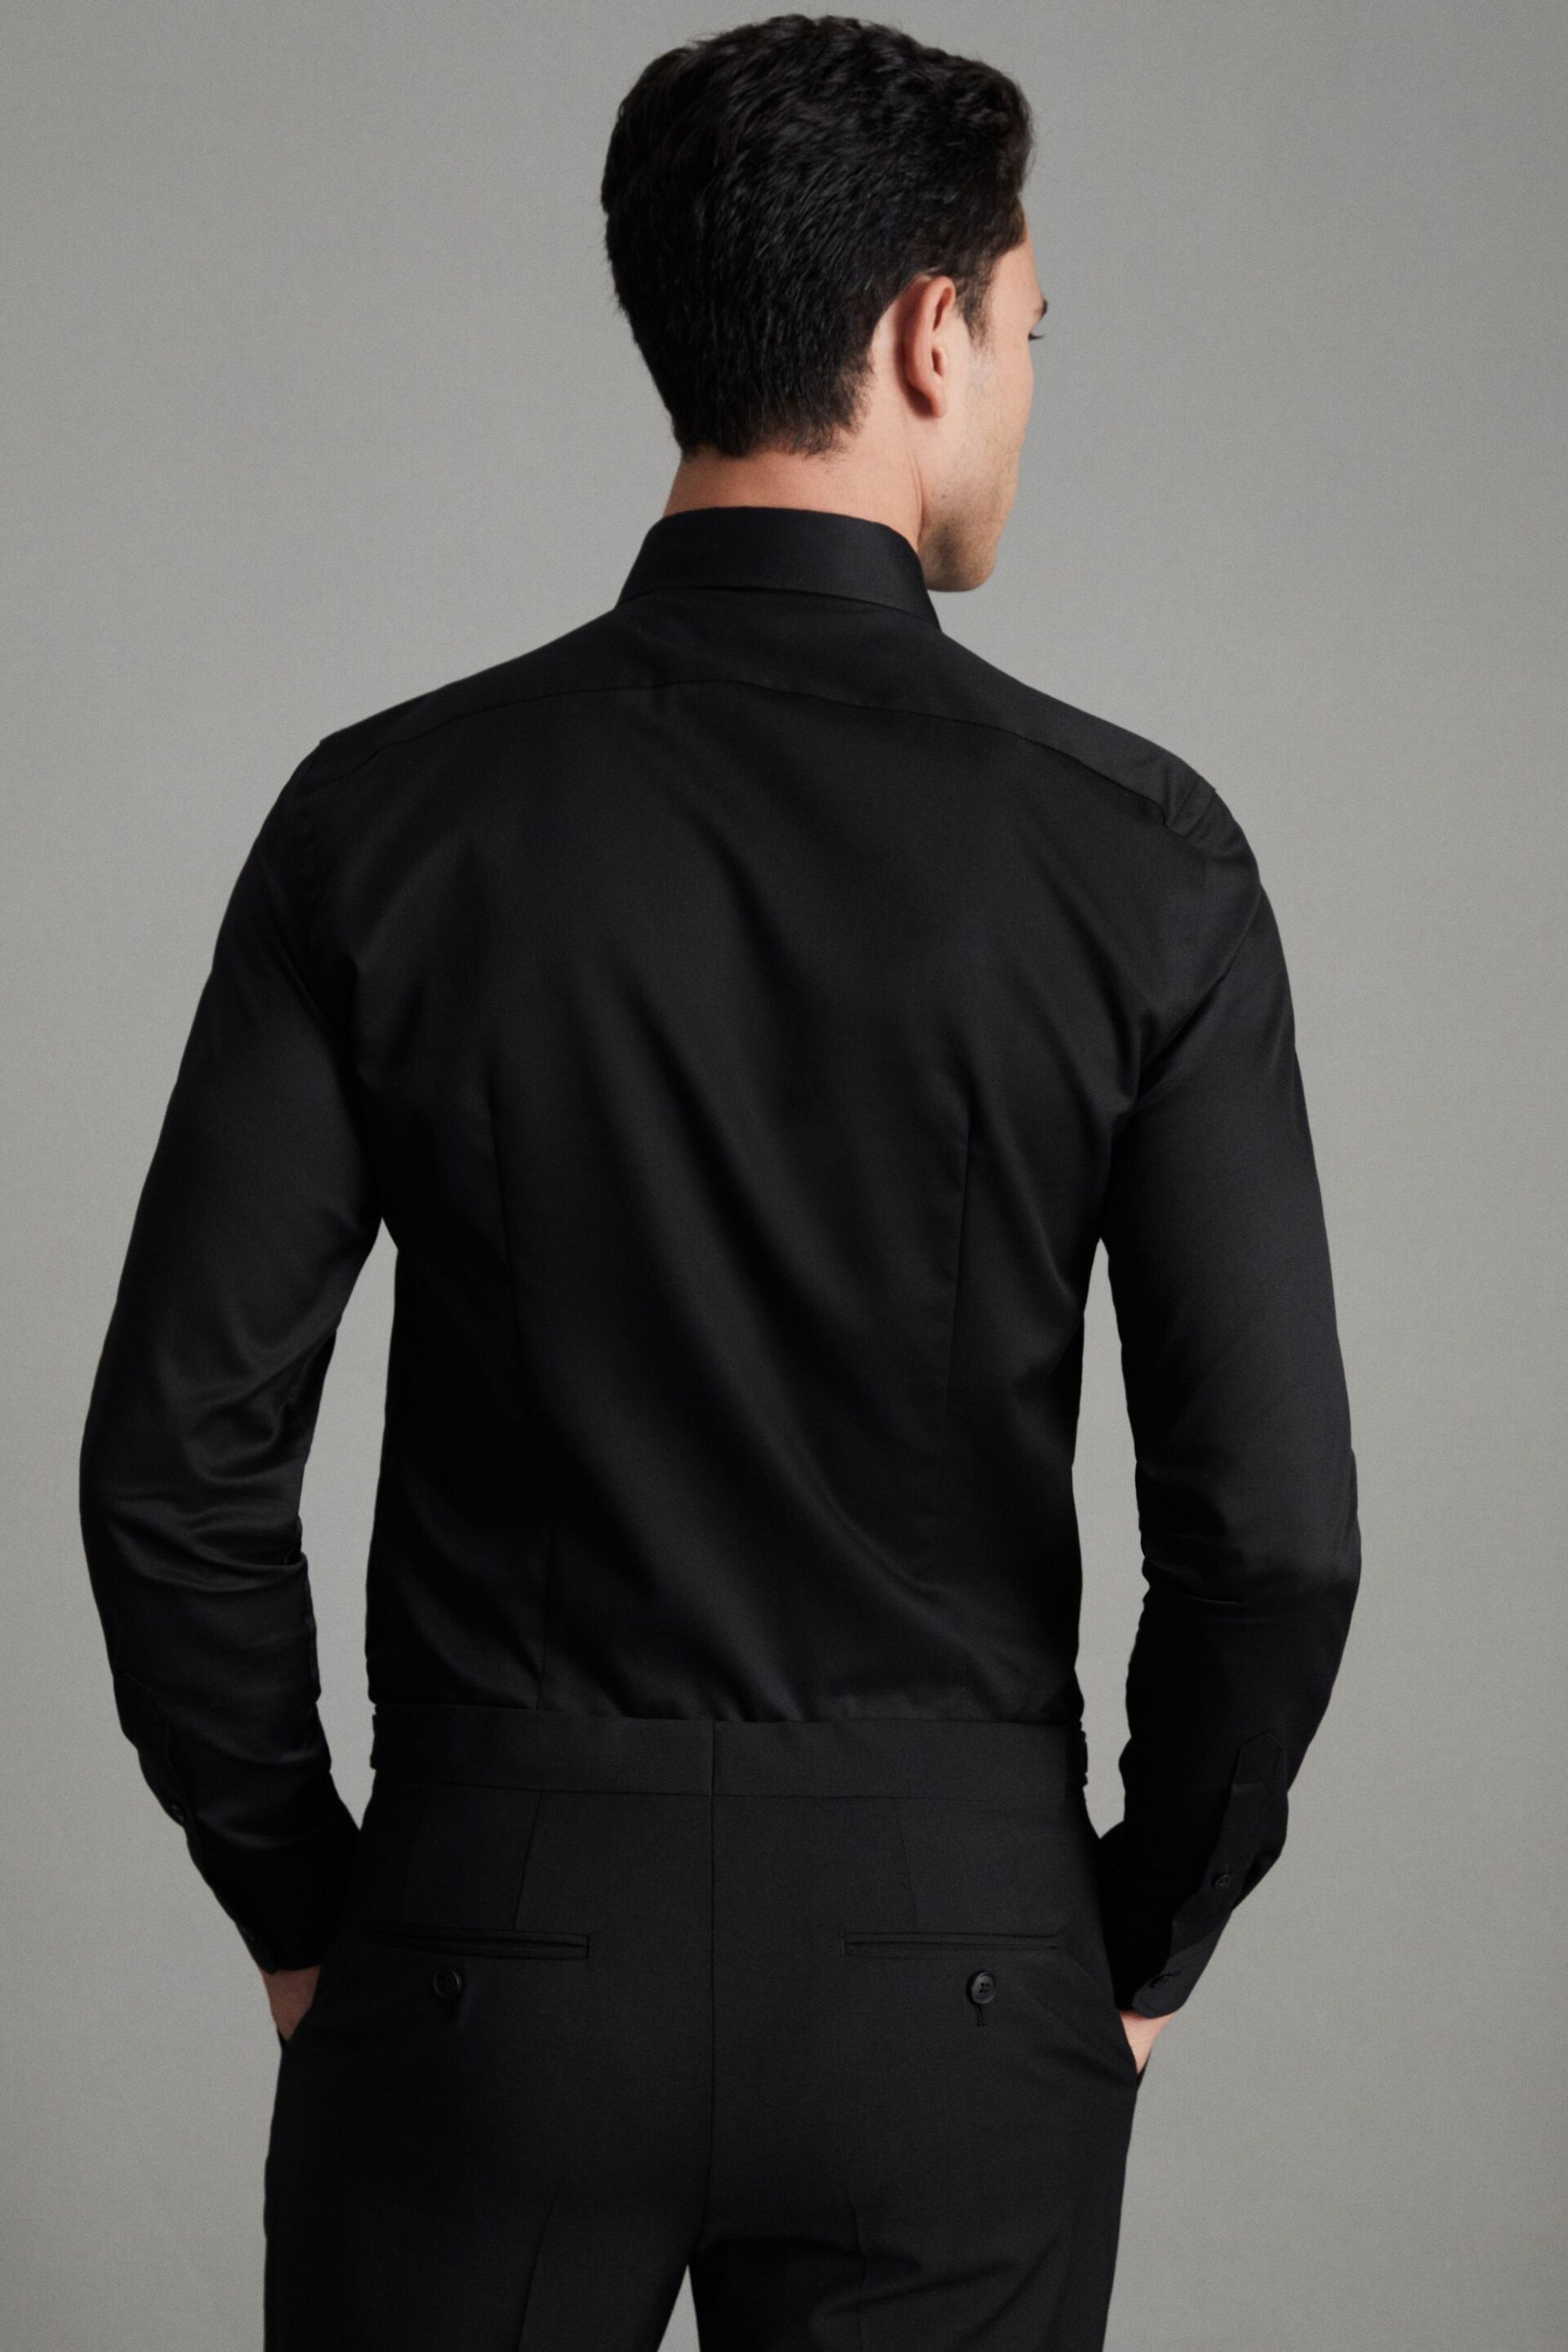 Reiss Black Storm Slim Fit Two-Fold Cotton Shirt - Image 4 of 6